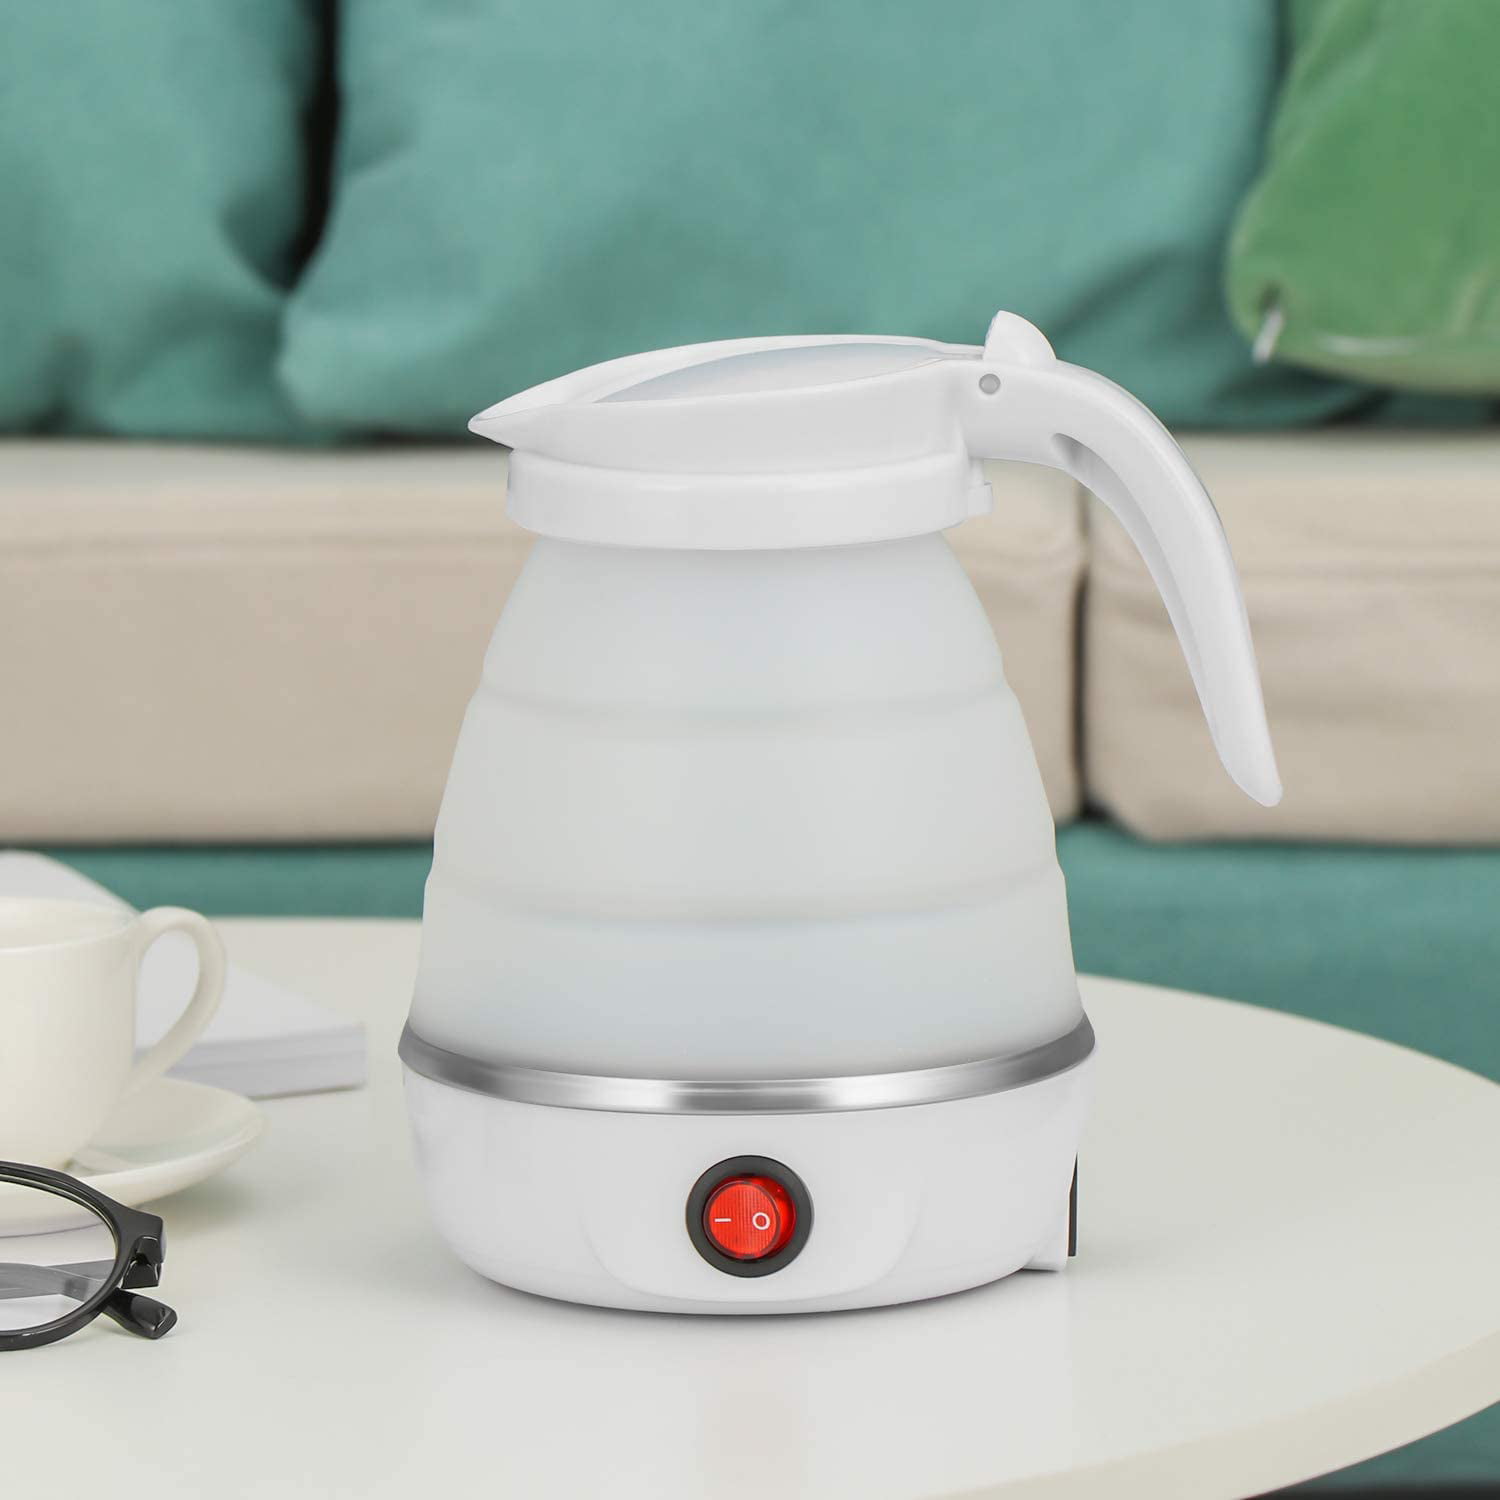 1pc White Foldable Kettle With European Standard Plug, Multi-function Hy-01  Button Type, Anti-dry Burning, Portable Travel Water Kettle